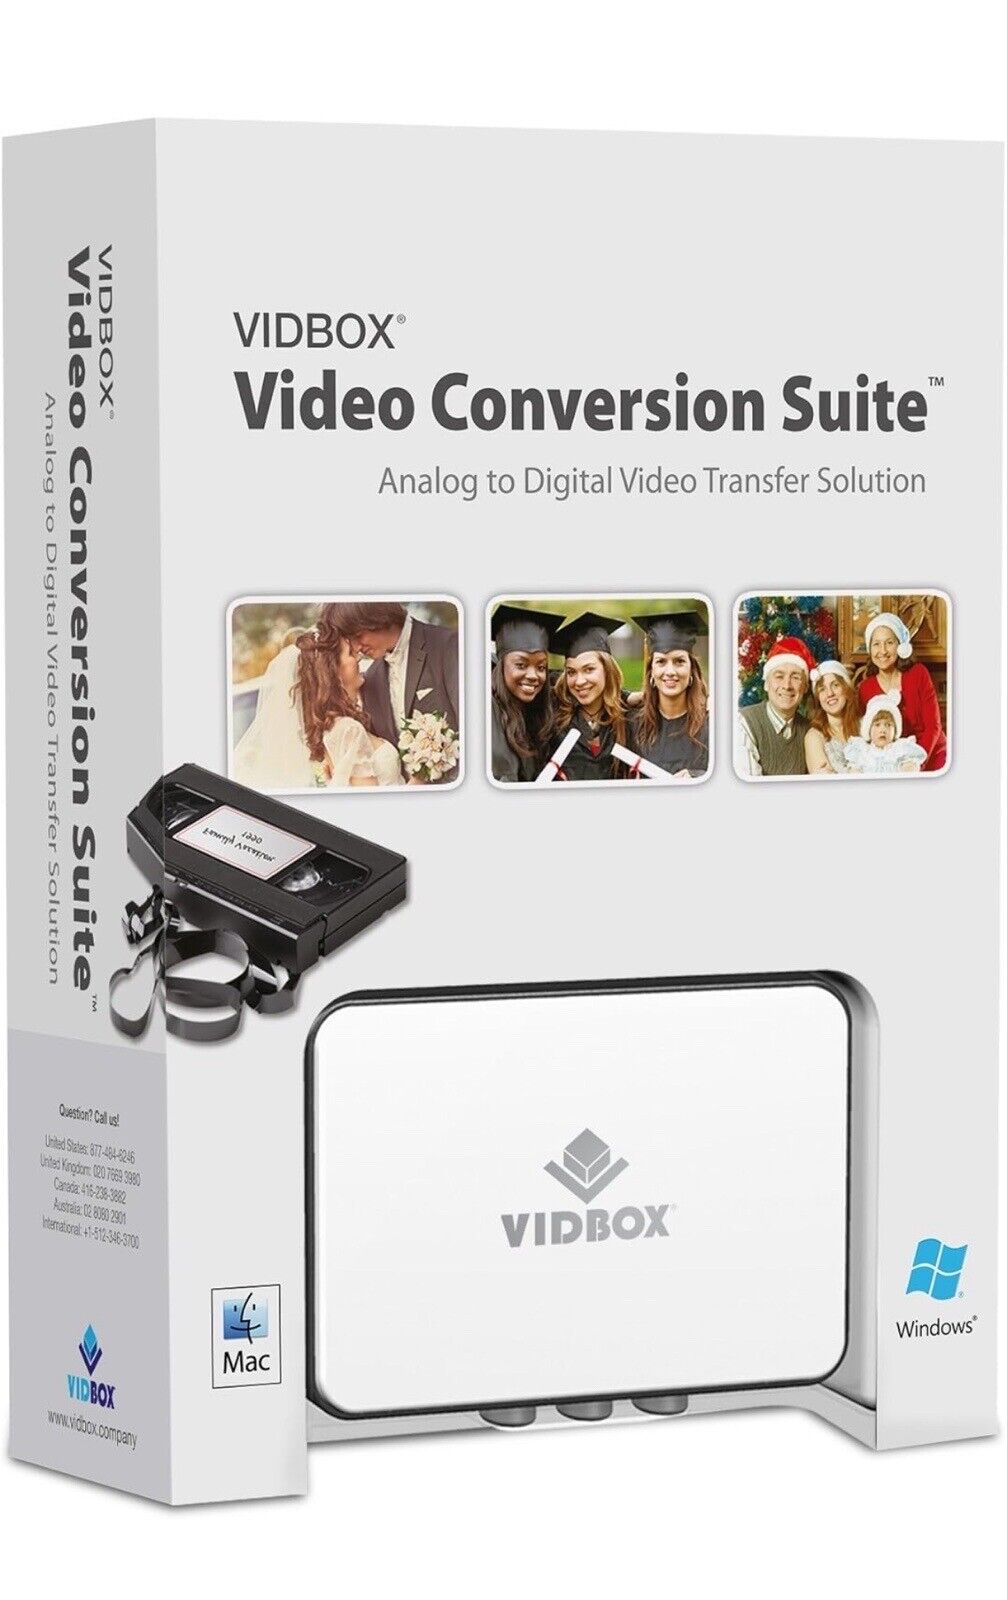 Vidbox VCS2M Video Conversion Suite PC and Mac Solution